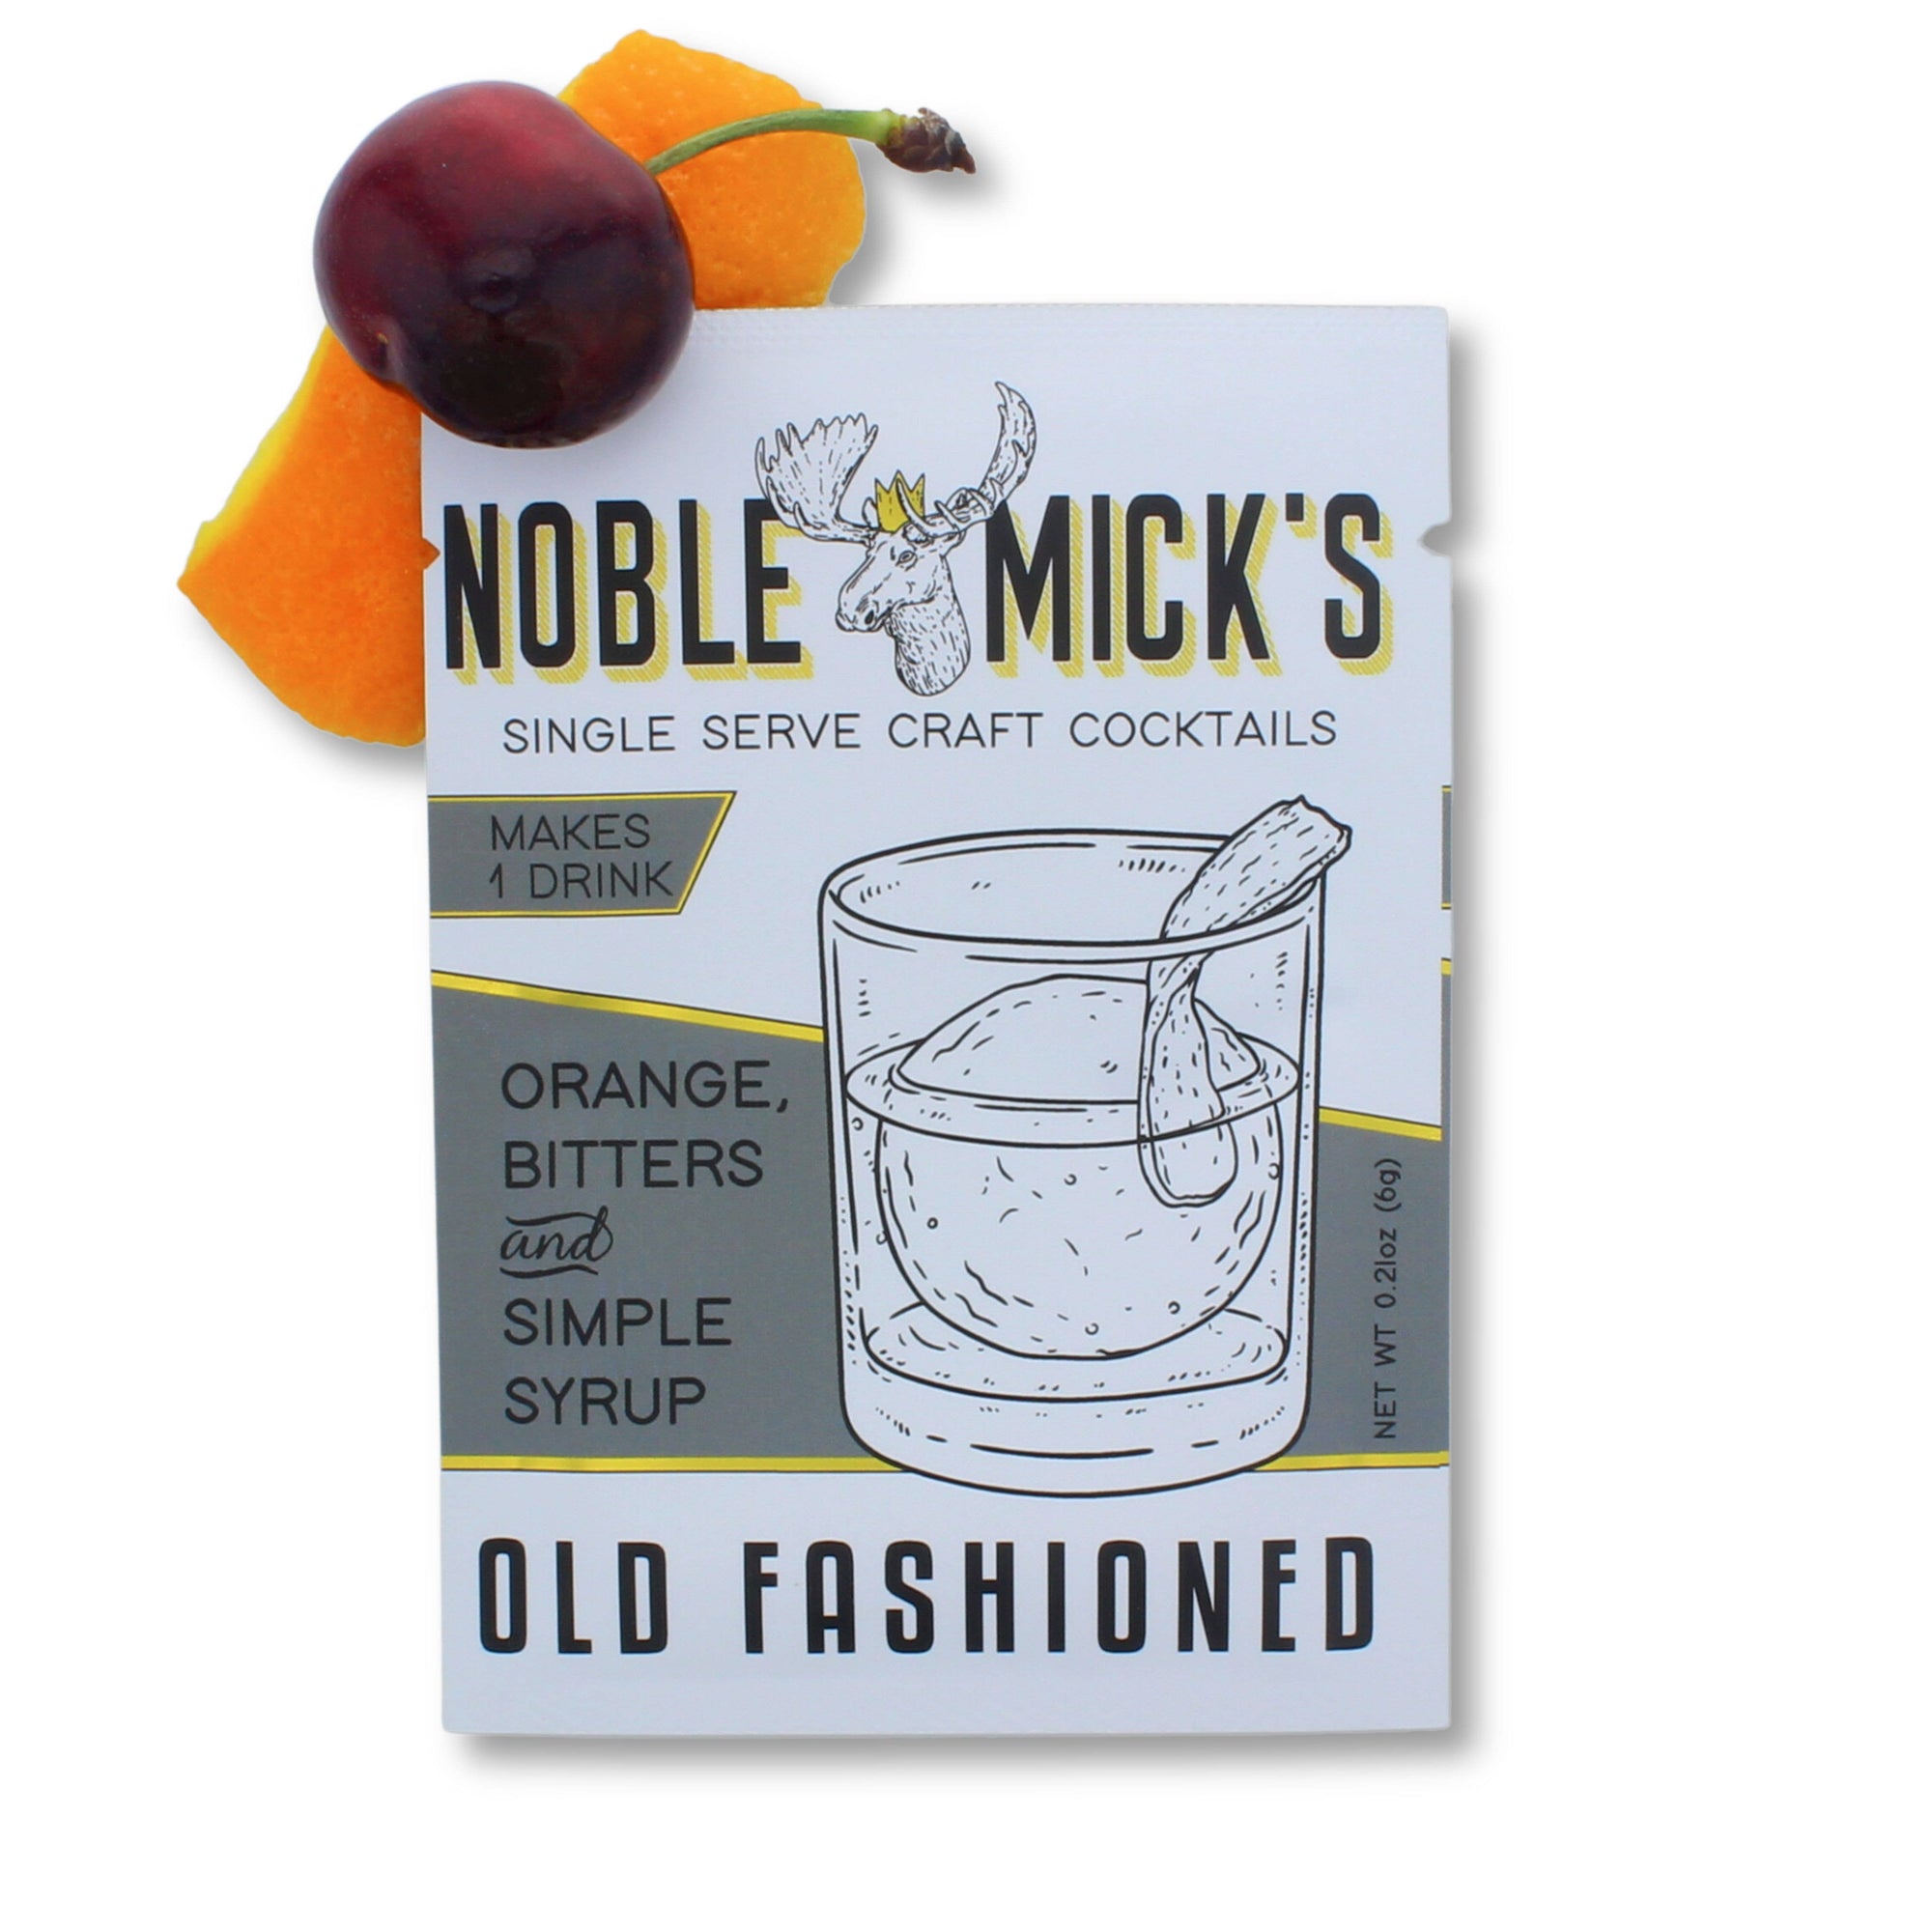 Old Fashioned Single Serve Craft Cocktail Mix